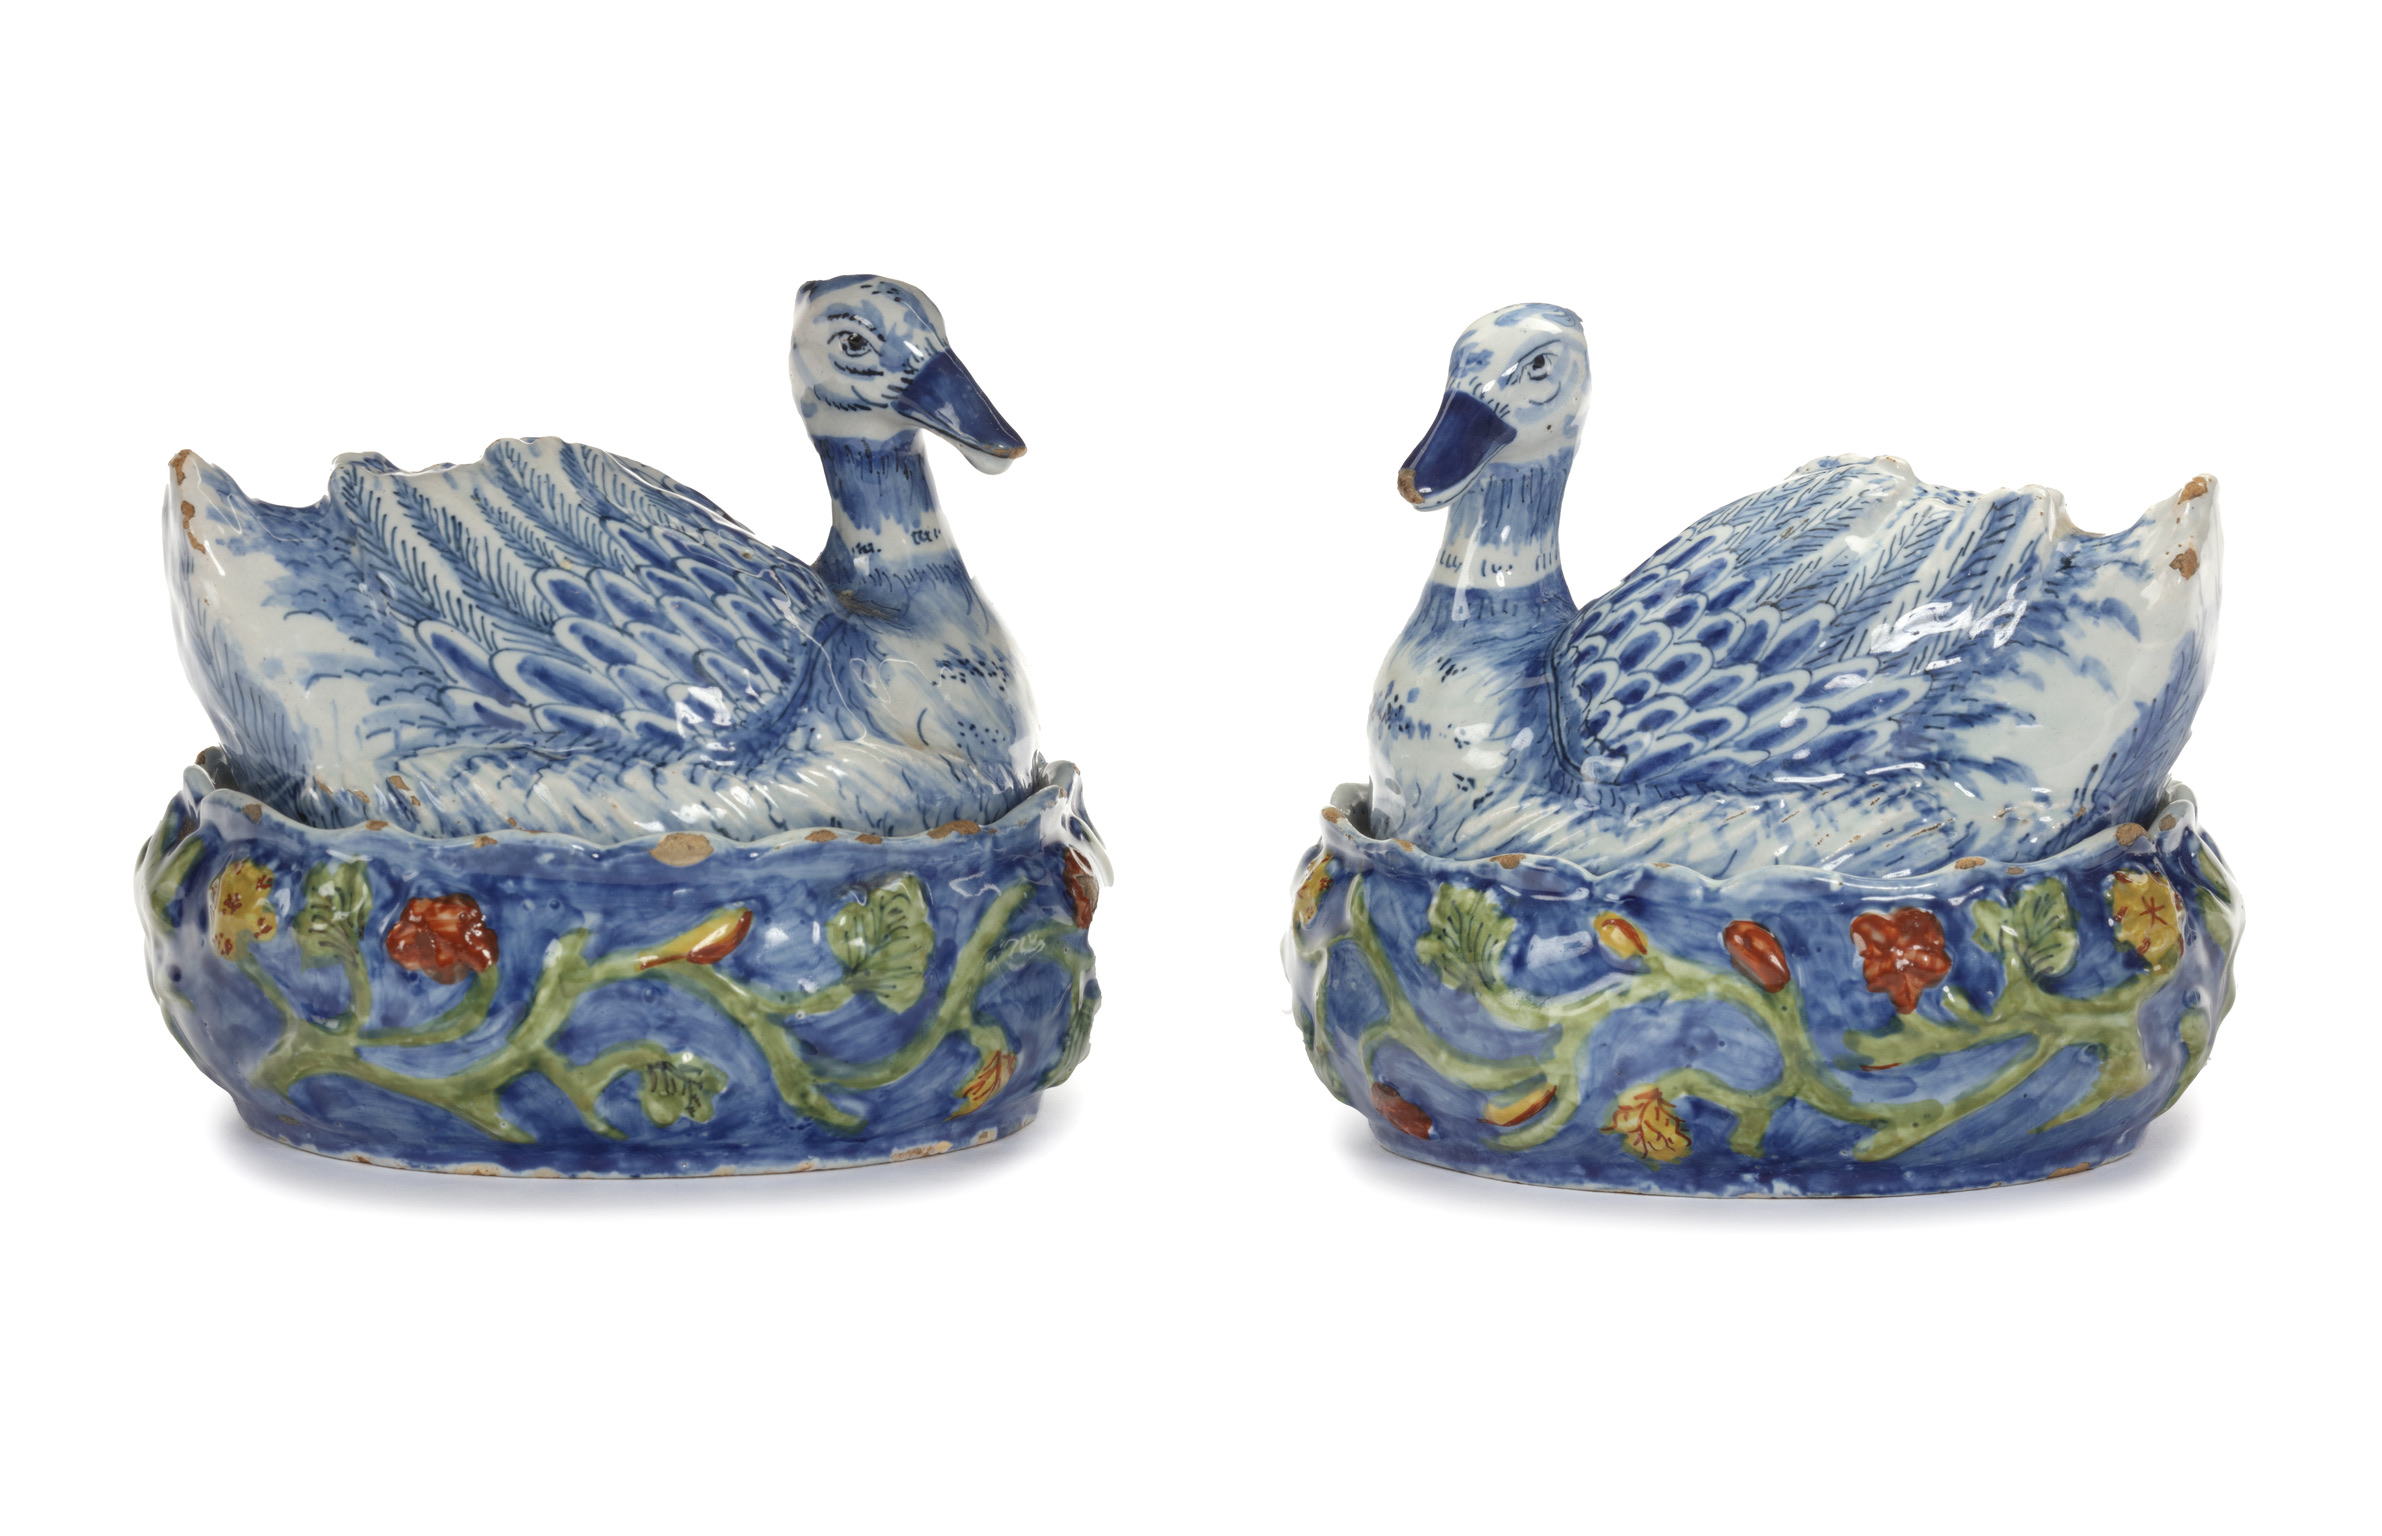 D2346. Pair of Polychrome Duck Tureens and Covers